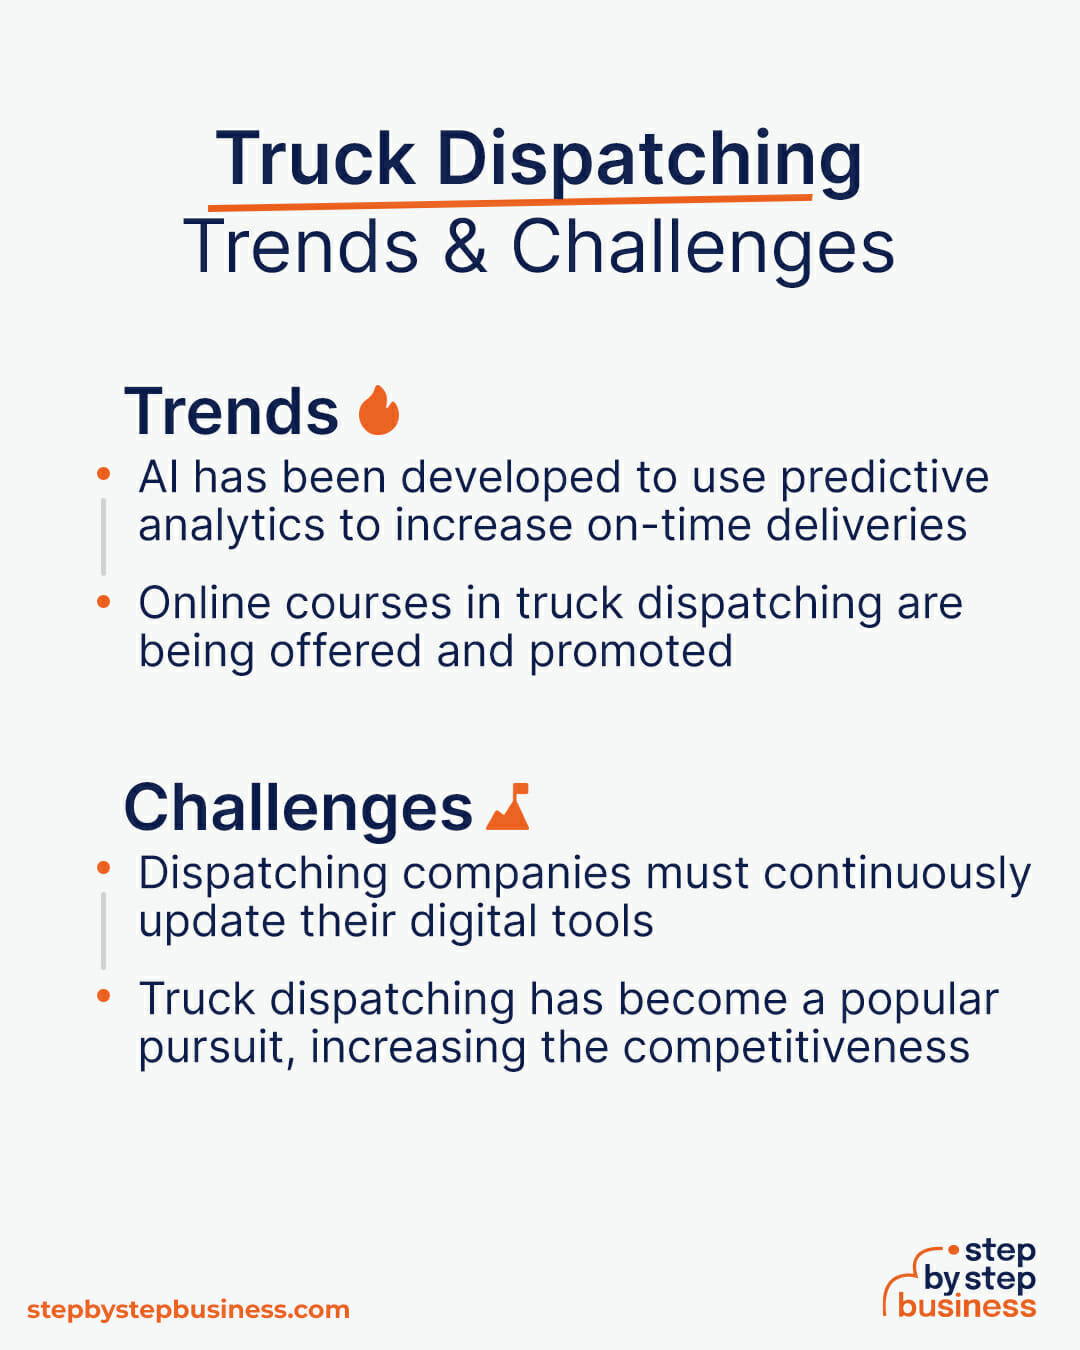 Truck Dispatching Industry Trends and Challenges